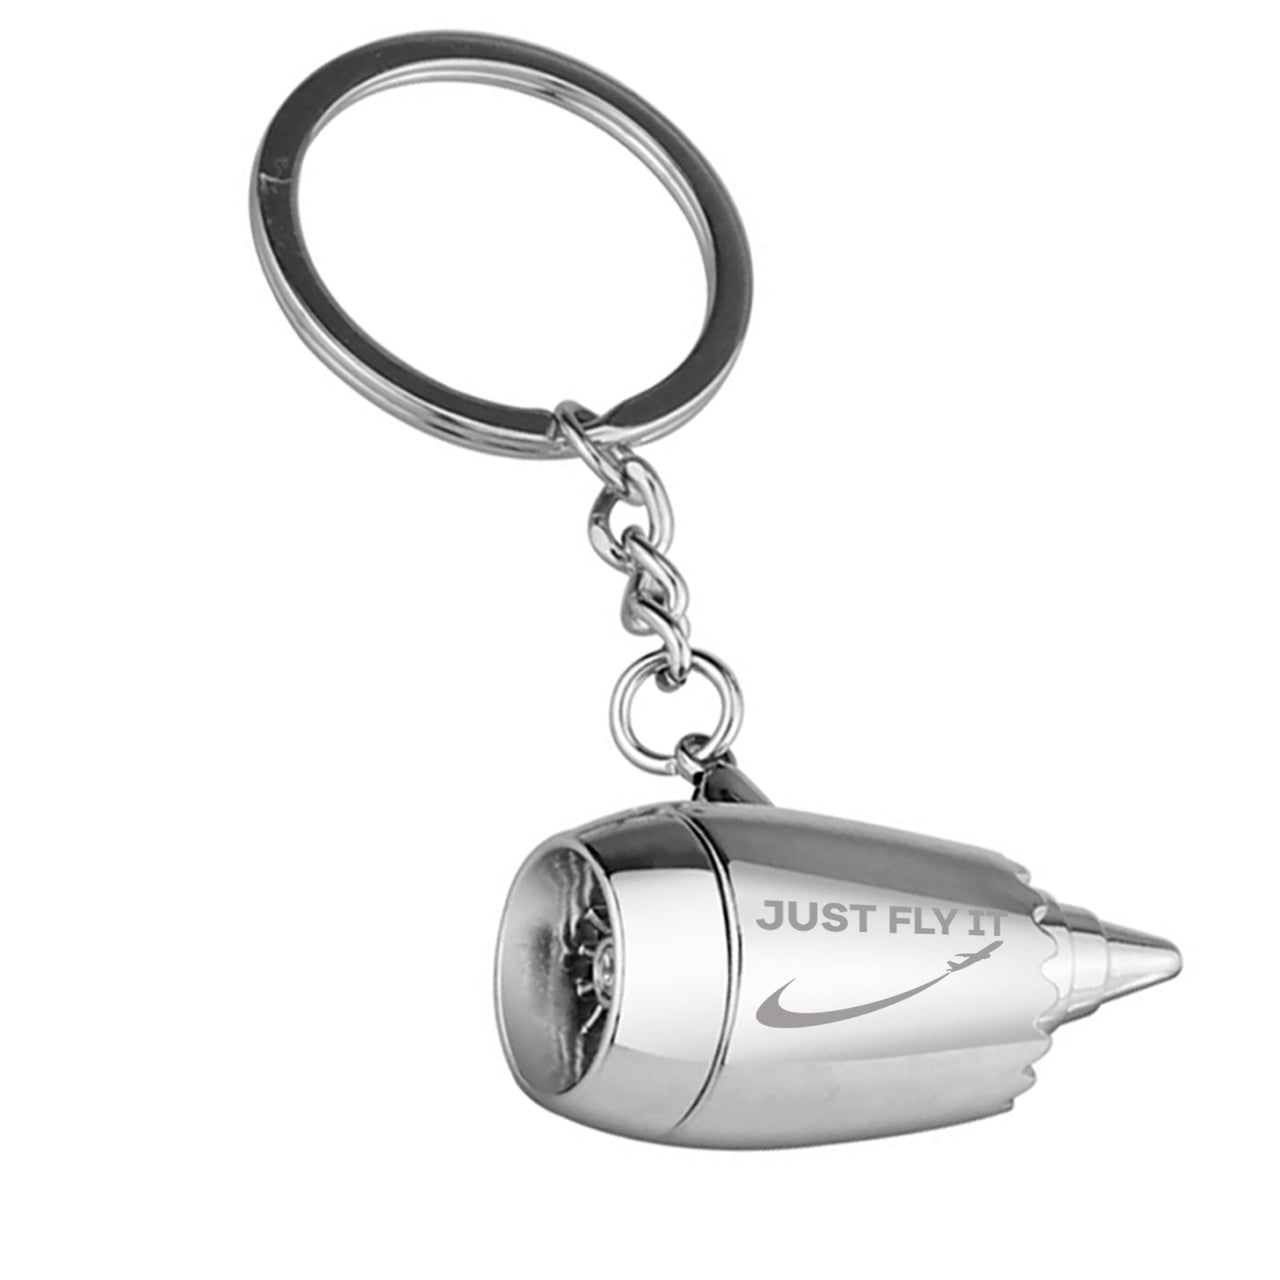 Just Fly It 2 Designed Airplane Jet Engine Shaped Key Chain